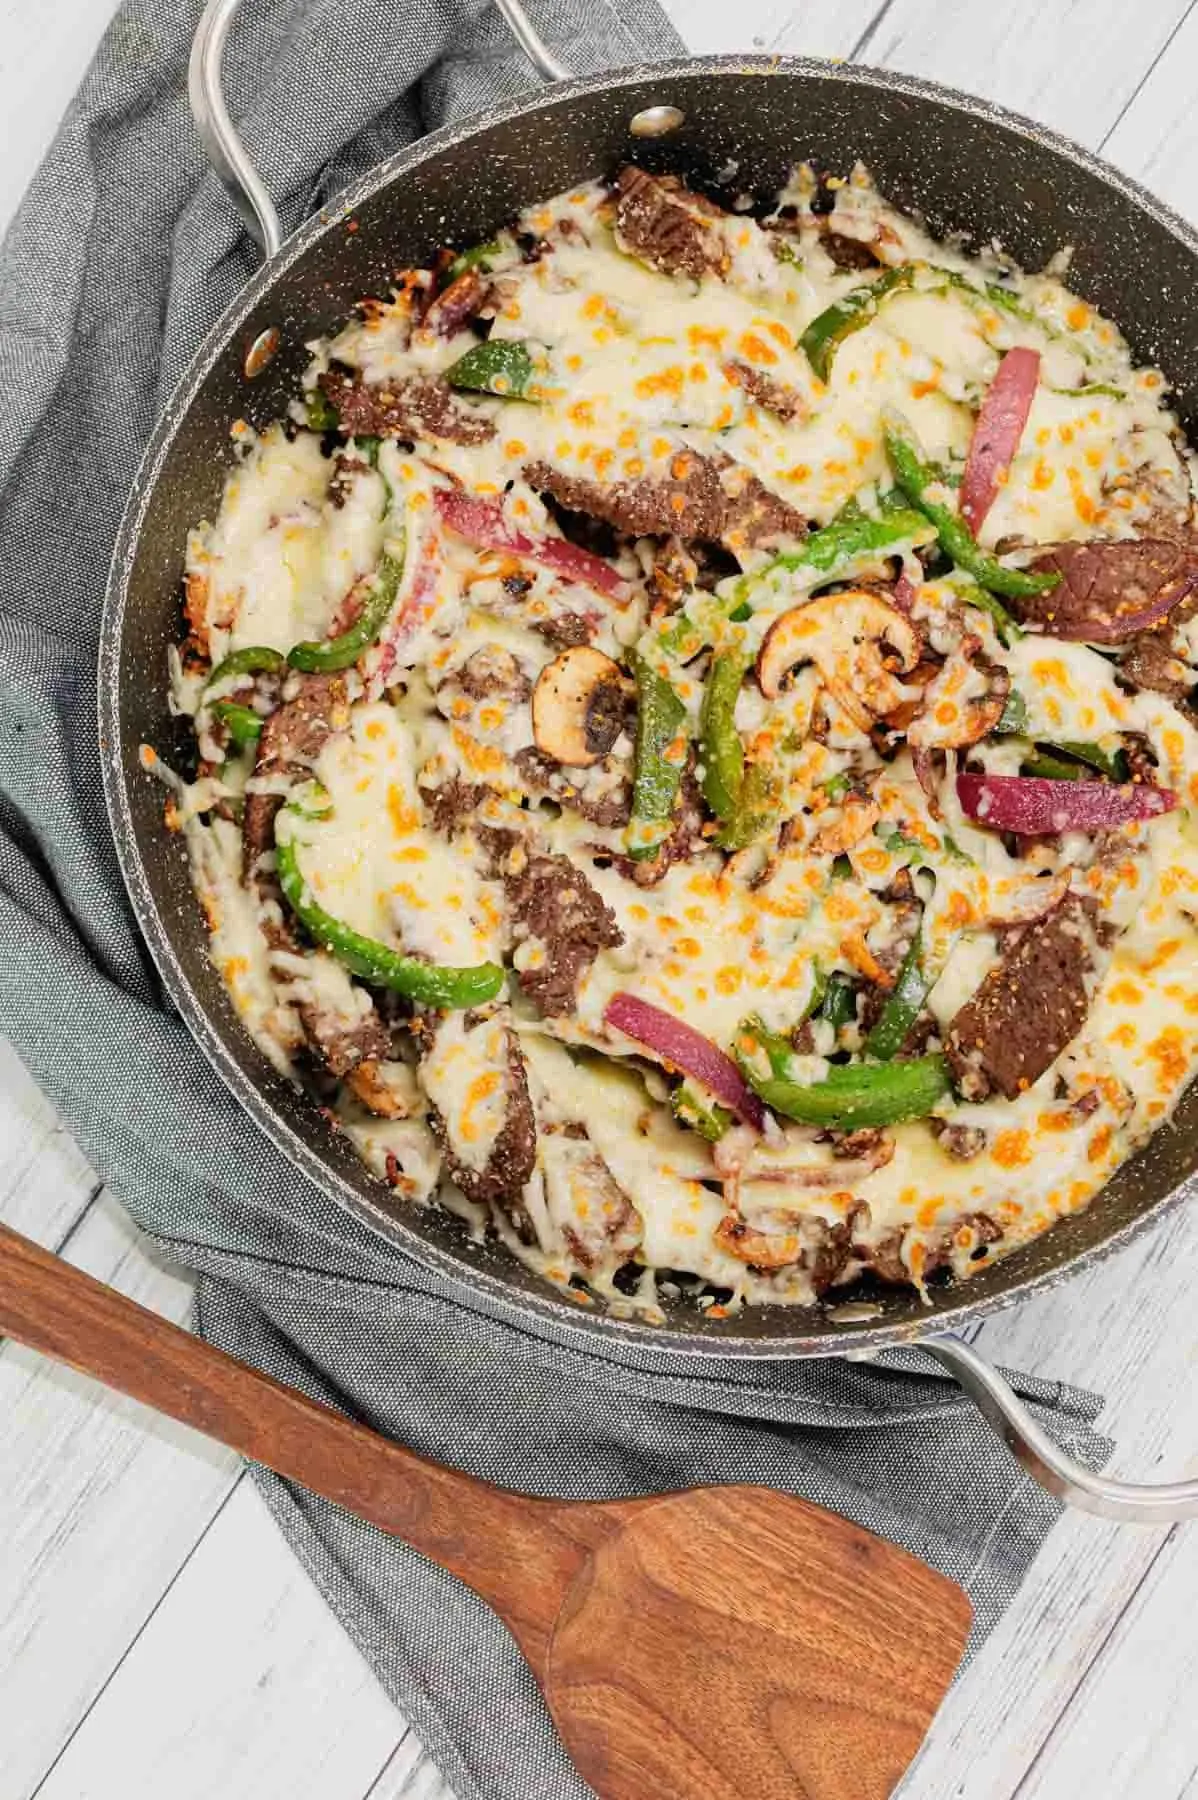 Philly Cheese Steak Skillet is a hearty dish loaded with steak strips, green bell peppers, red onions, sliced mushrooms and topped with a blend of mozzarella and provolone.